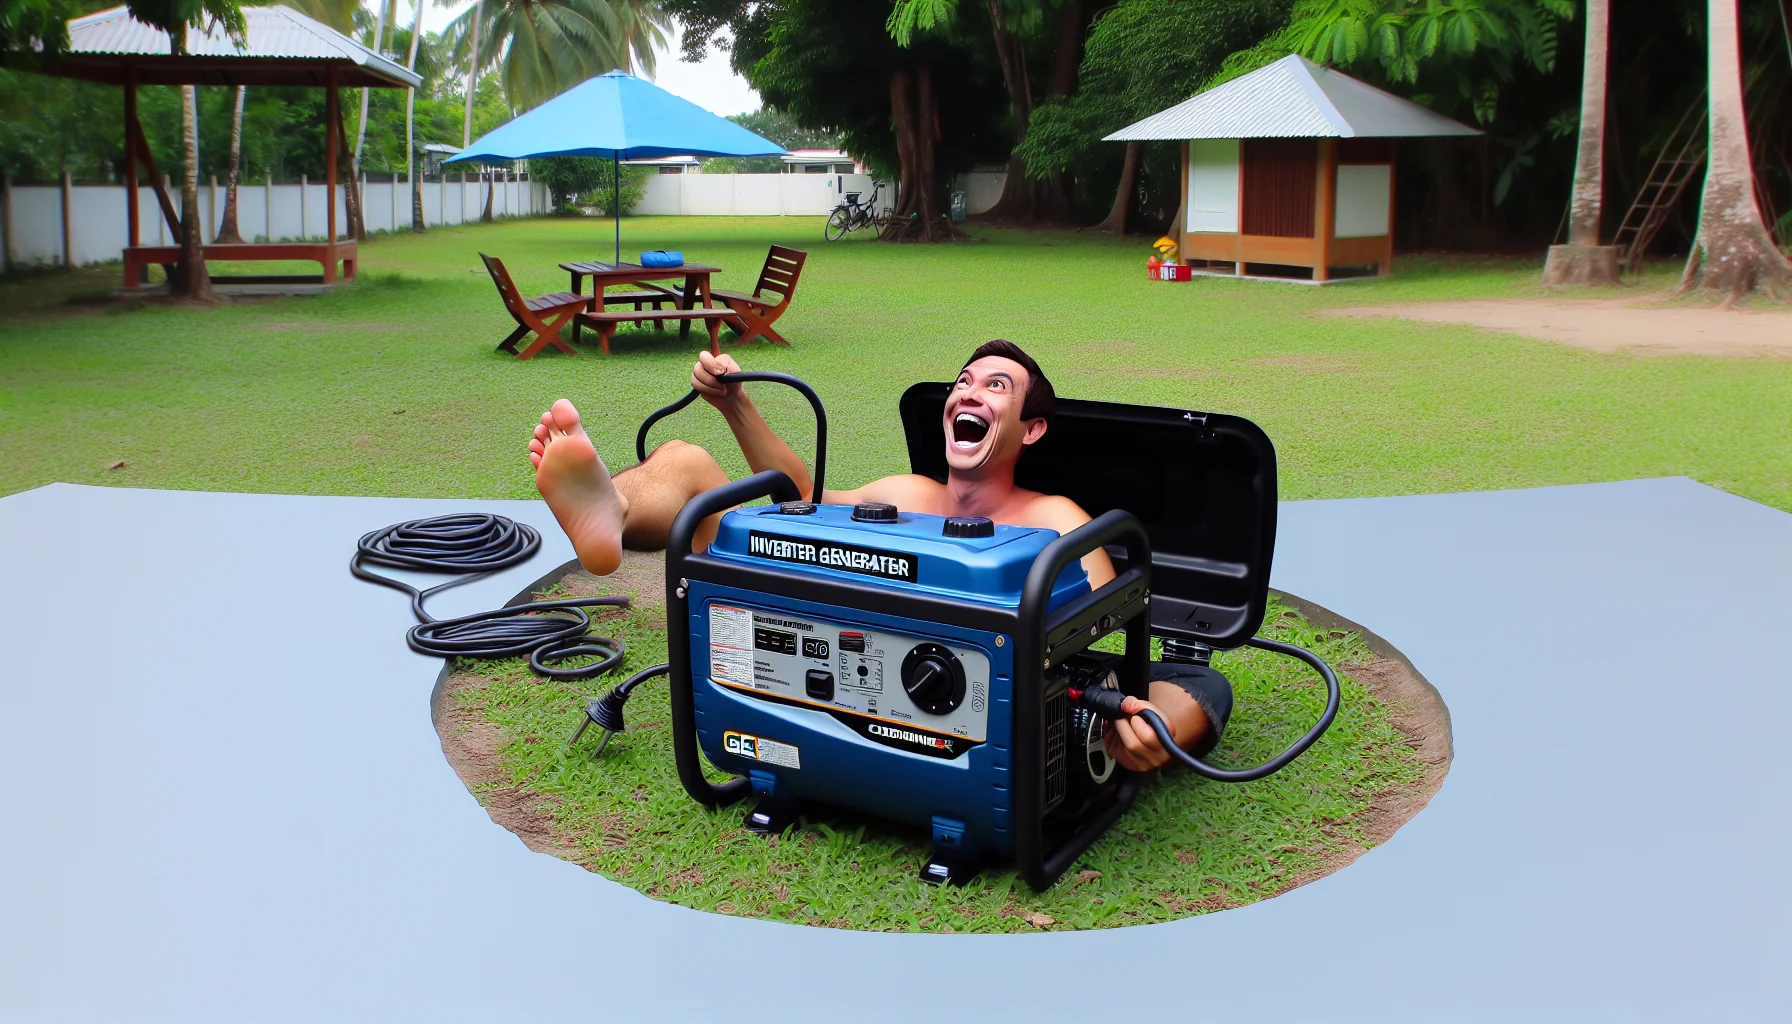 Create an image of an inverter generator, designed in a similar manner to standard models by known brands, in a humorous situation. The generator is playfully producing electricity in an unexpected location. The placement of the generator provokes amusement and incites curiosity about the concept of personal electricity generation. This scenario is set in a creative, outdoors environment, perhaps a park or a picnic area where electricity is not typically available, highlighting the convenience and unexpected use cases of a personal power generator.